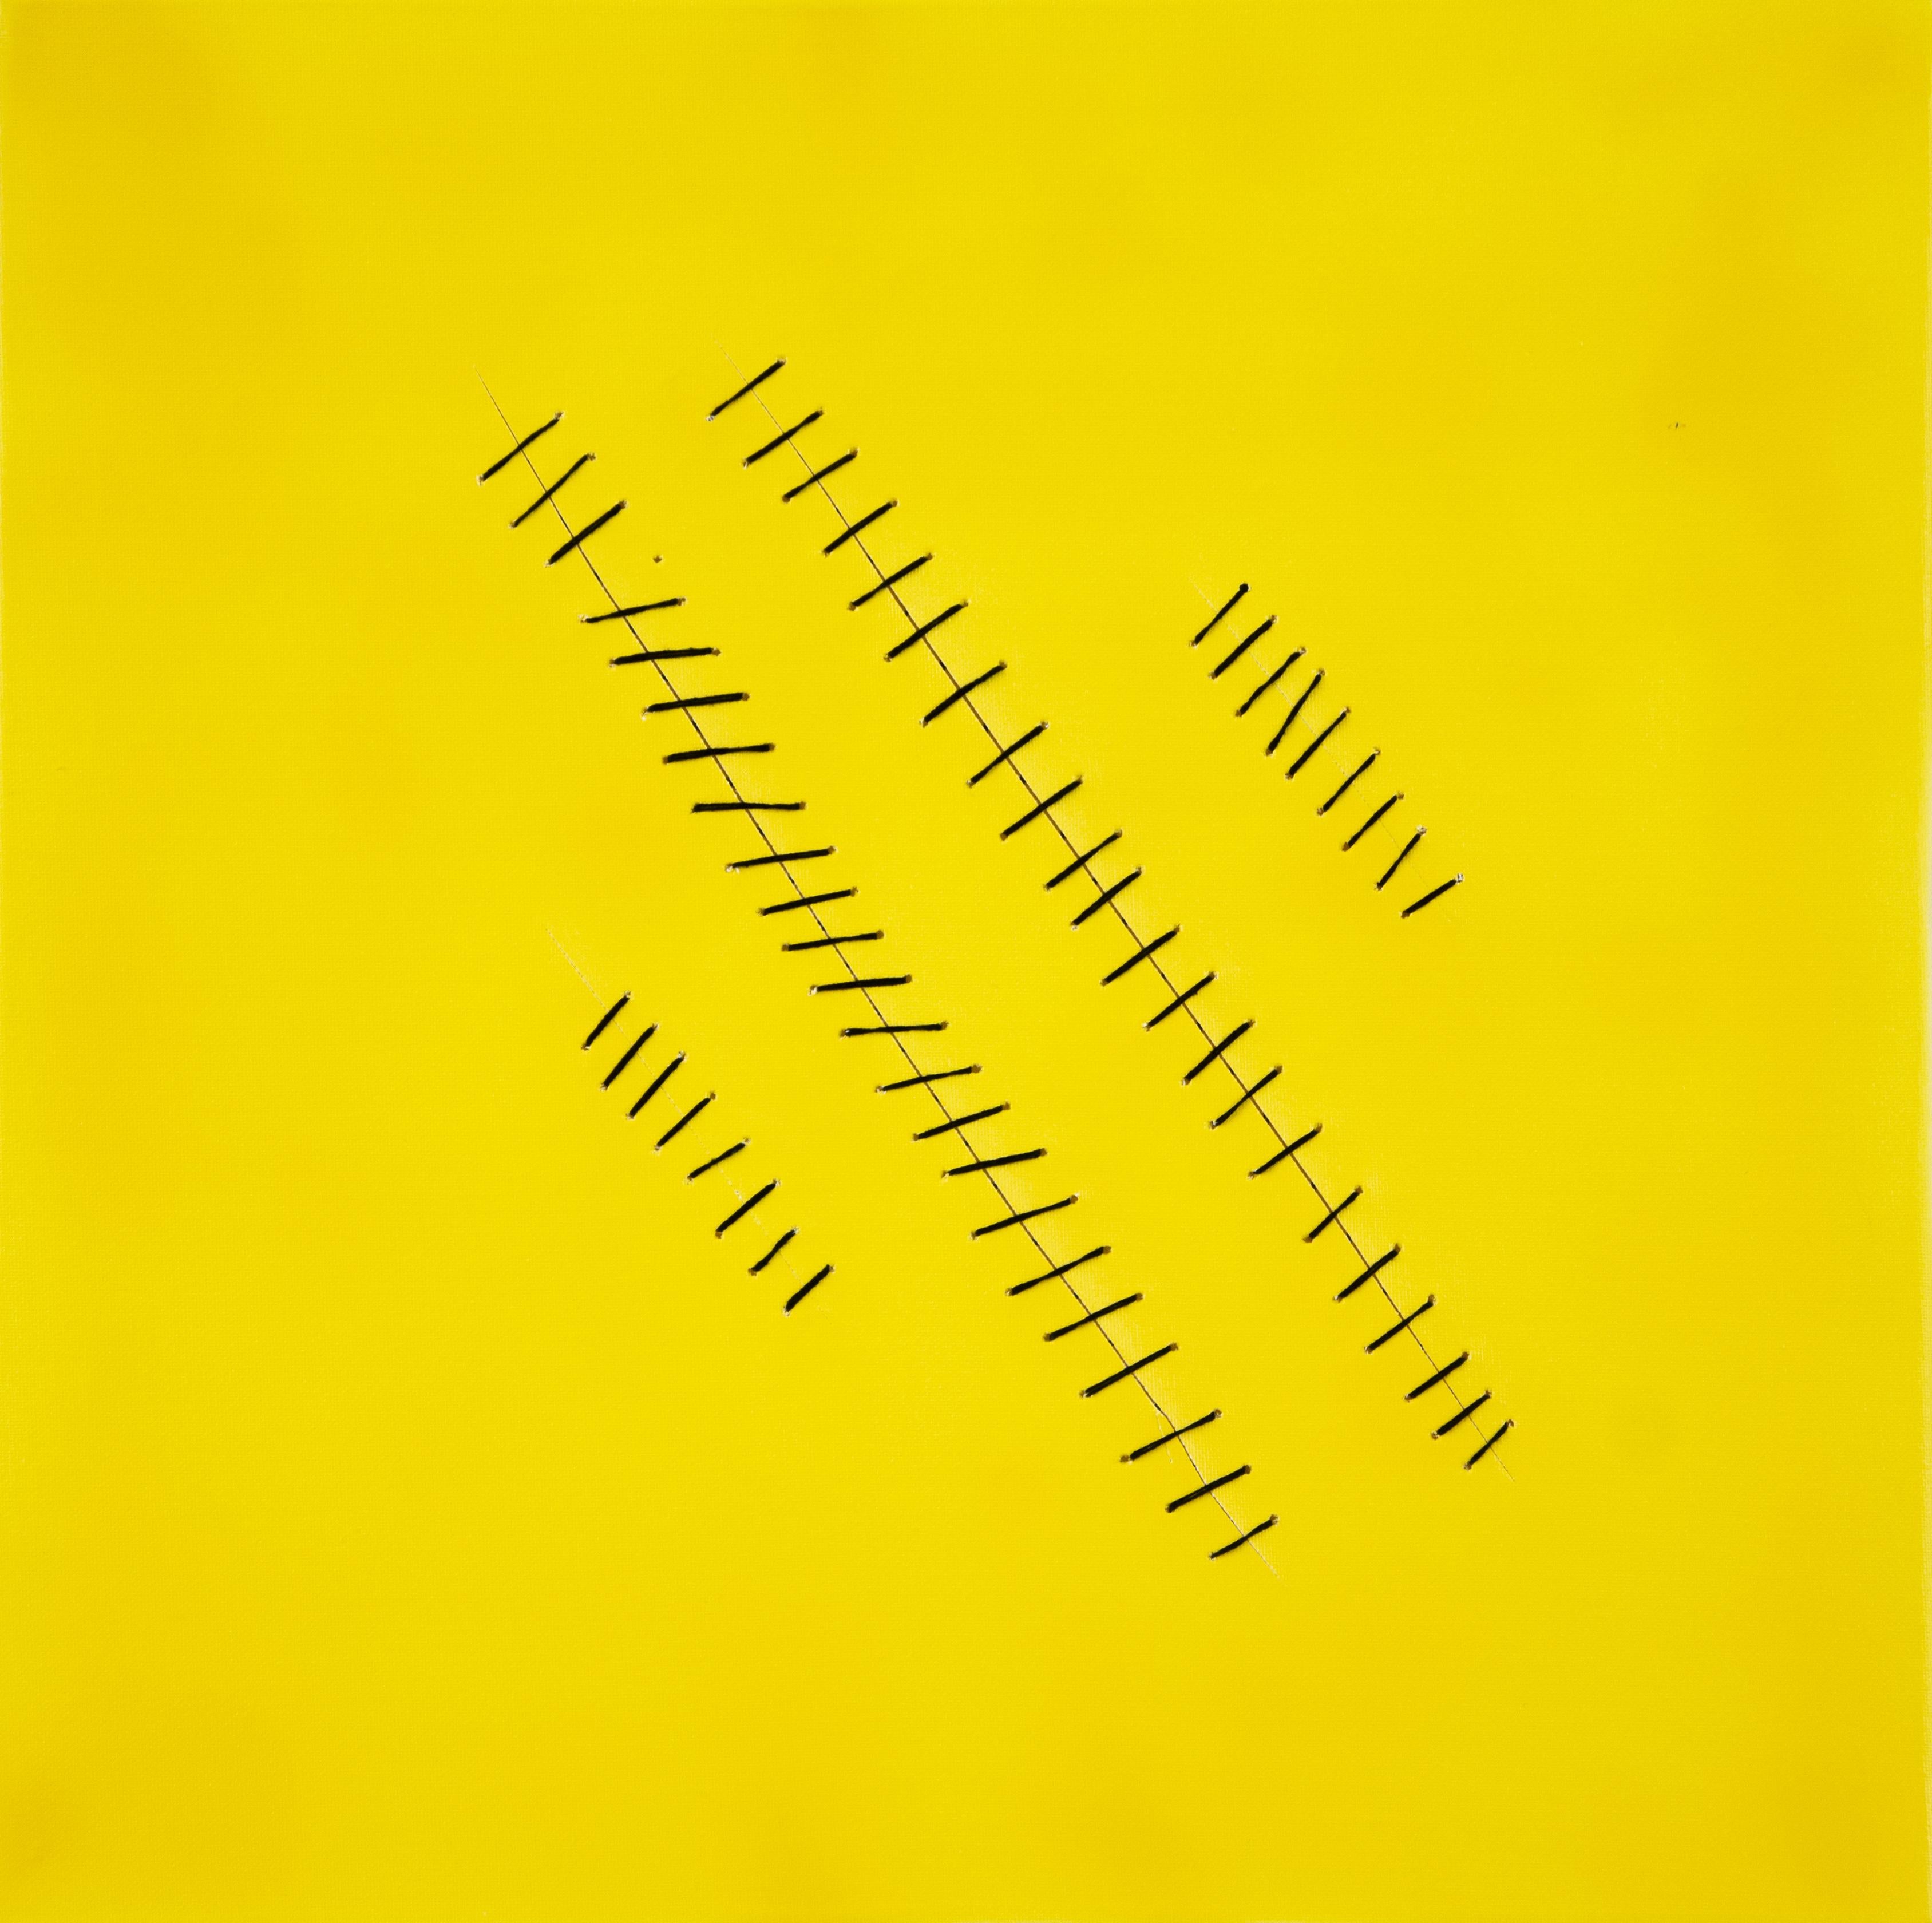 Oblique Seams on Yellow - Acrylic Painting by Mario Bigetti - 2020